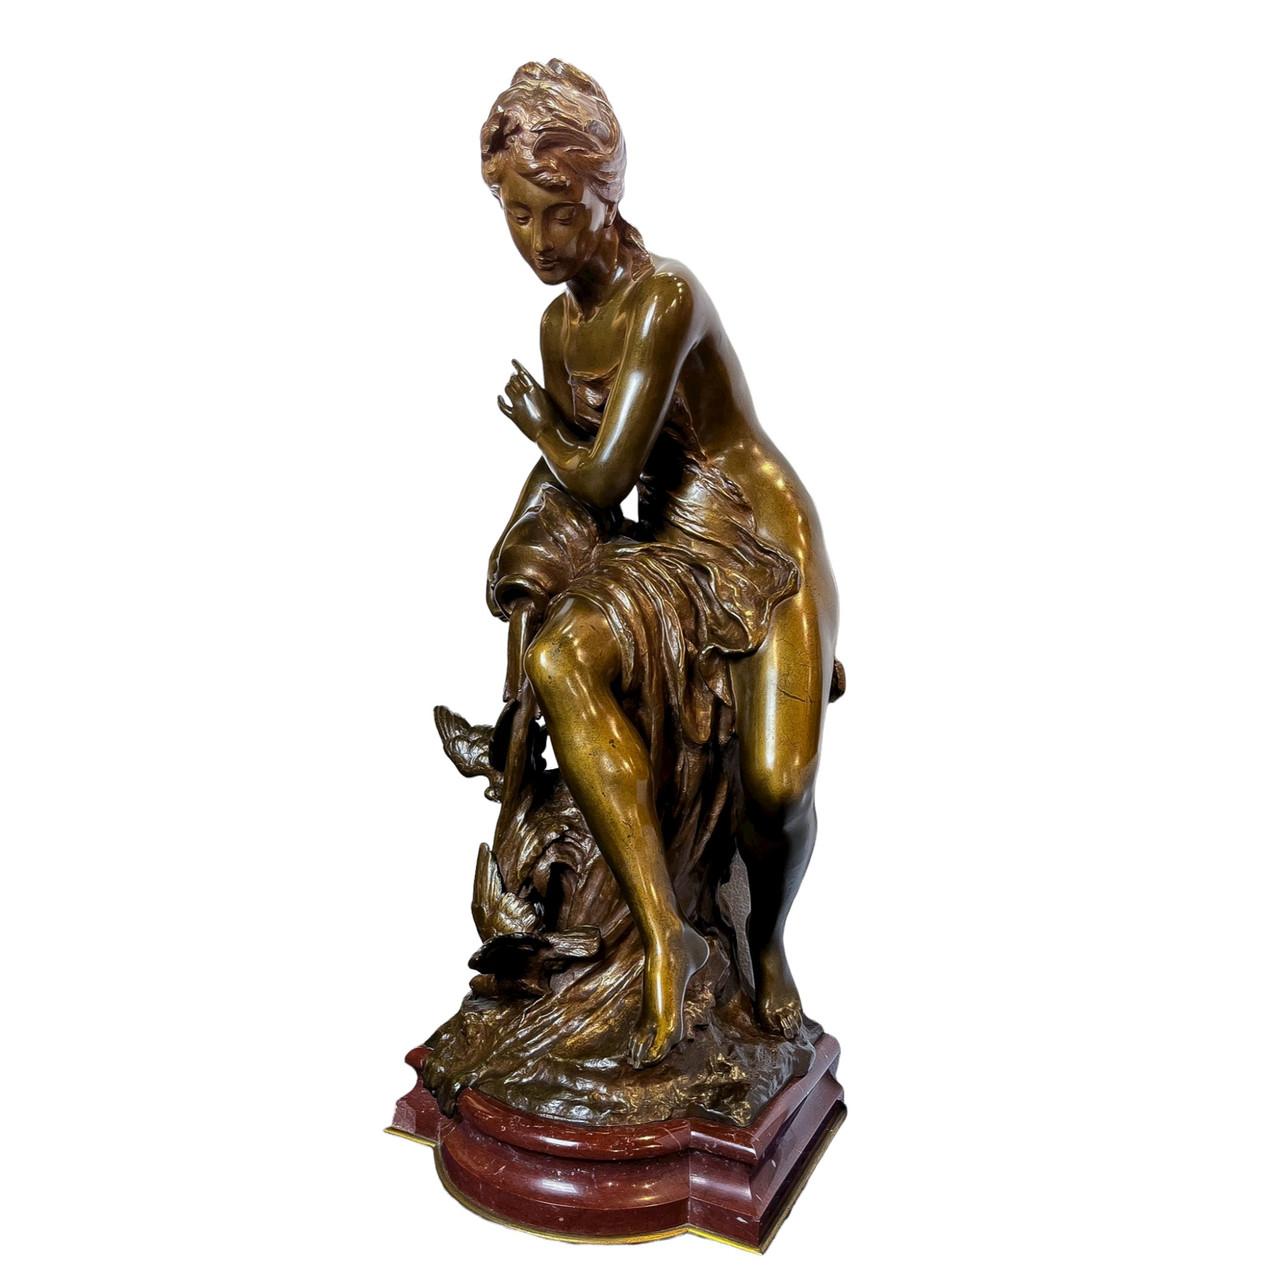 A beauty sits on a stone, pouring water from a jug onto the rock beside her. Two birds play in the water as it cascades down. The woman wears a wreath around her head with a piece of fabric to protect her modesty. The statue sits on rouge marble